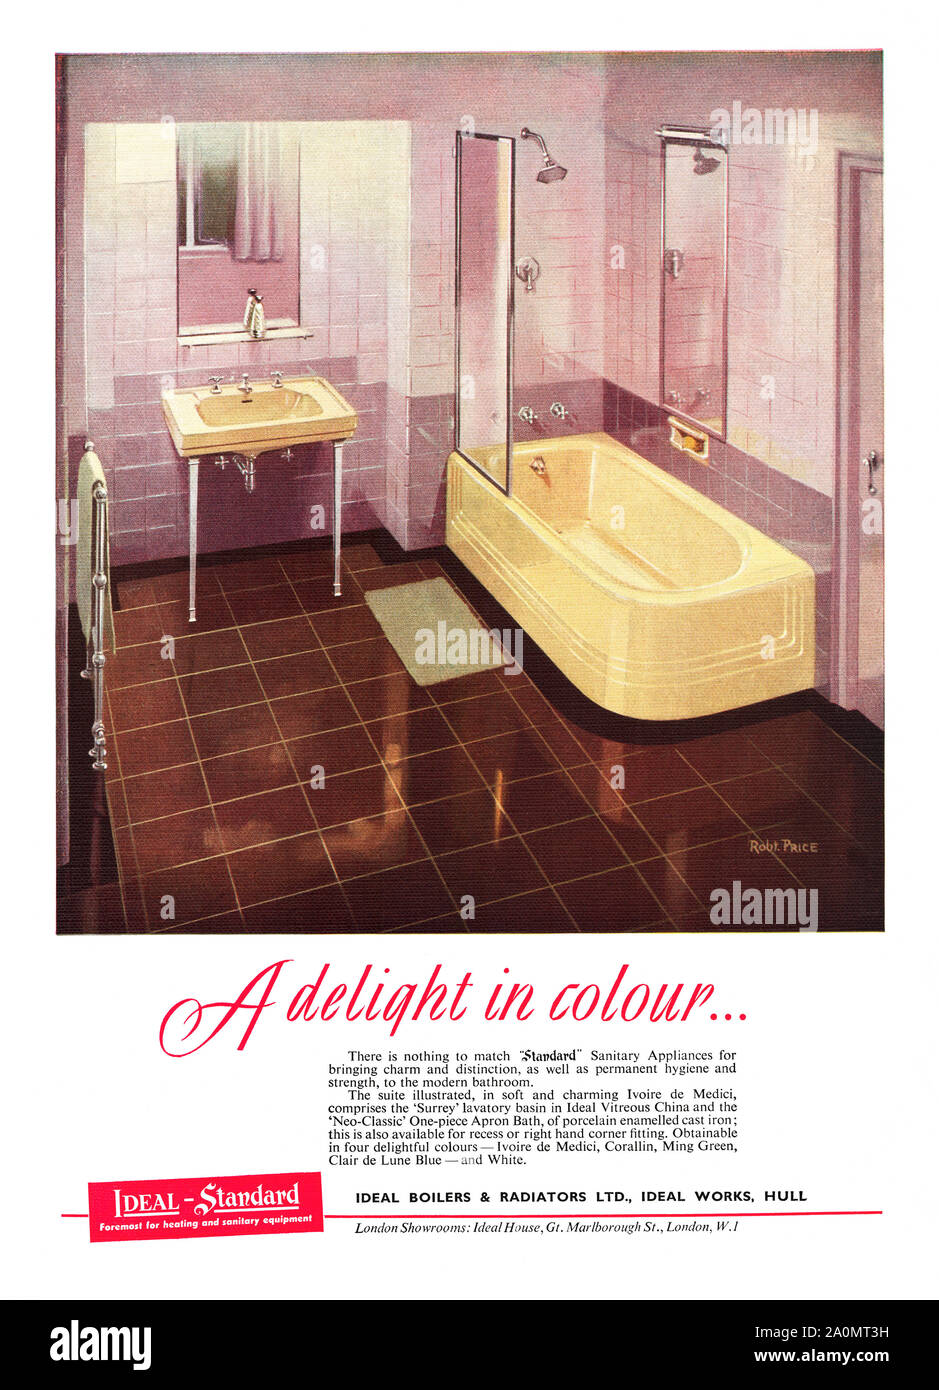 Advert for an Ideal Standard coloured bathroom suite, 1951. The illustration shows a fully-tiled bathroom, a bath with a shower over and a basin - both in a soft yellow colour and with Art Deco styling and from the Ideal Works in Hull, East Yorkshire. Stock Photo